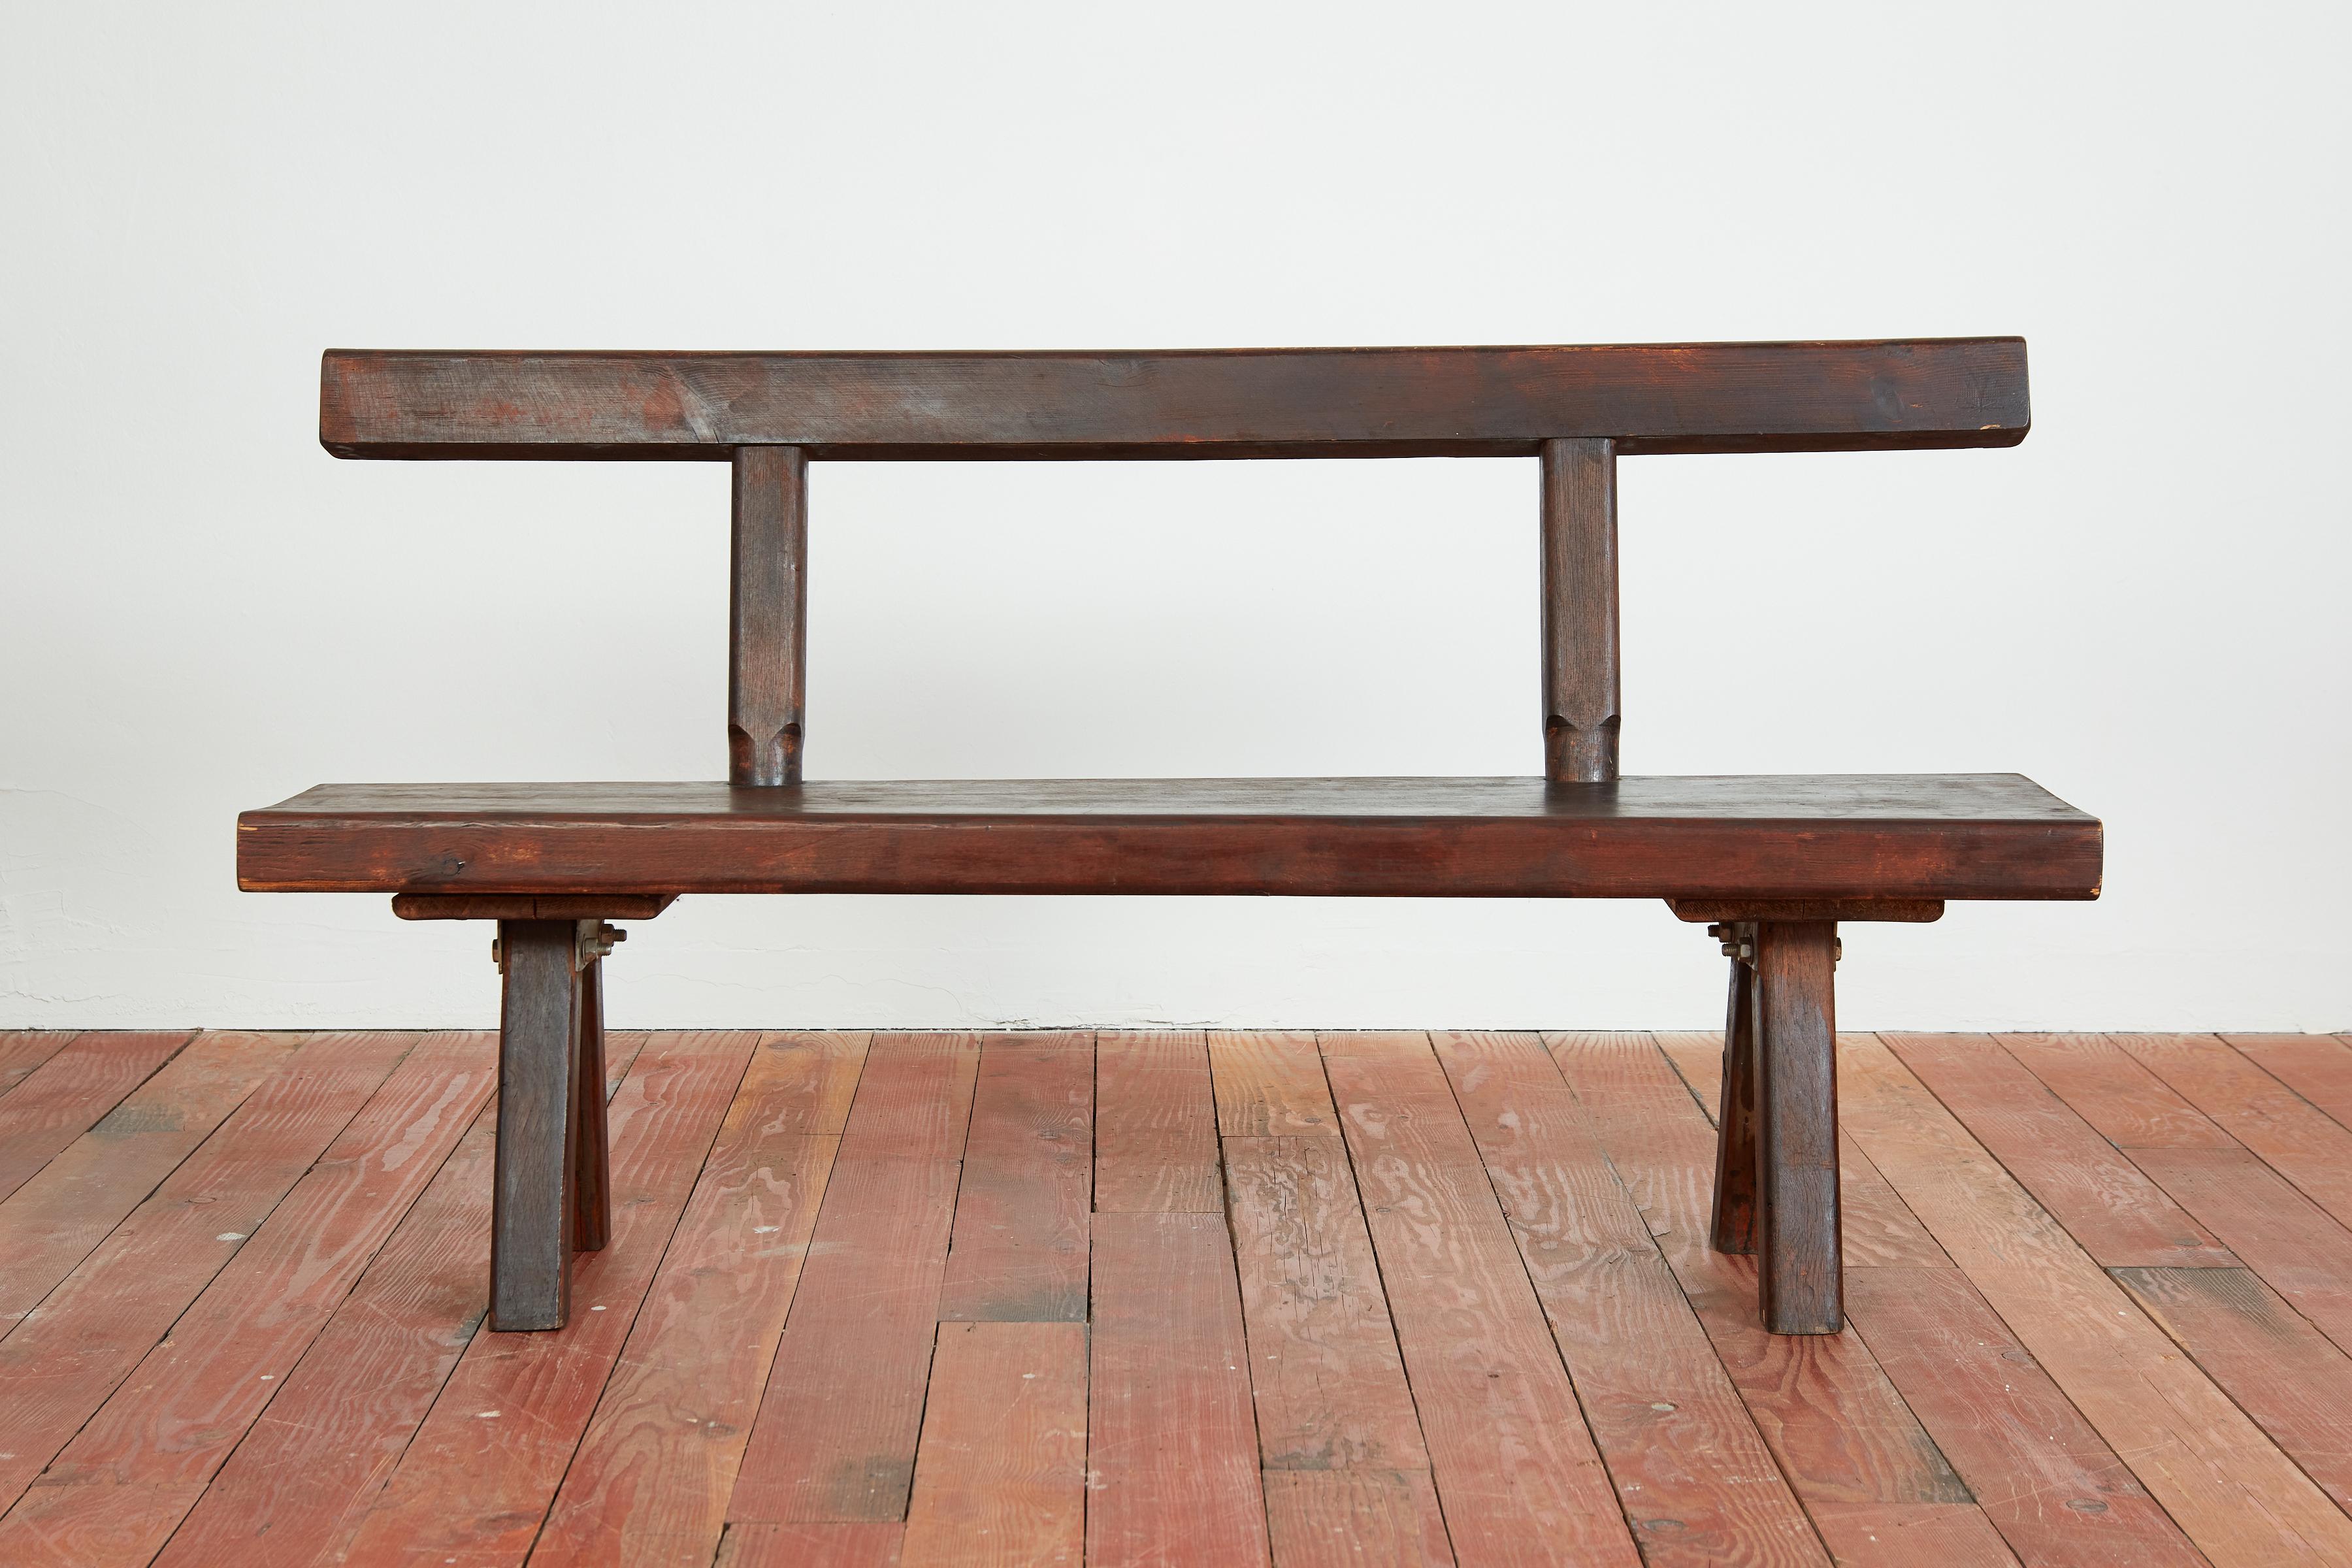 Solid oak French bench with T-shape and rich dark patina - France 1950s
Thick wood with wonderful craftsmanship
Priced individually - 2 available 